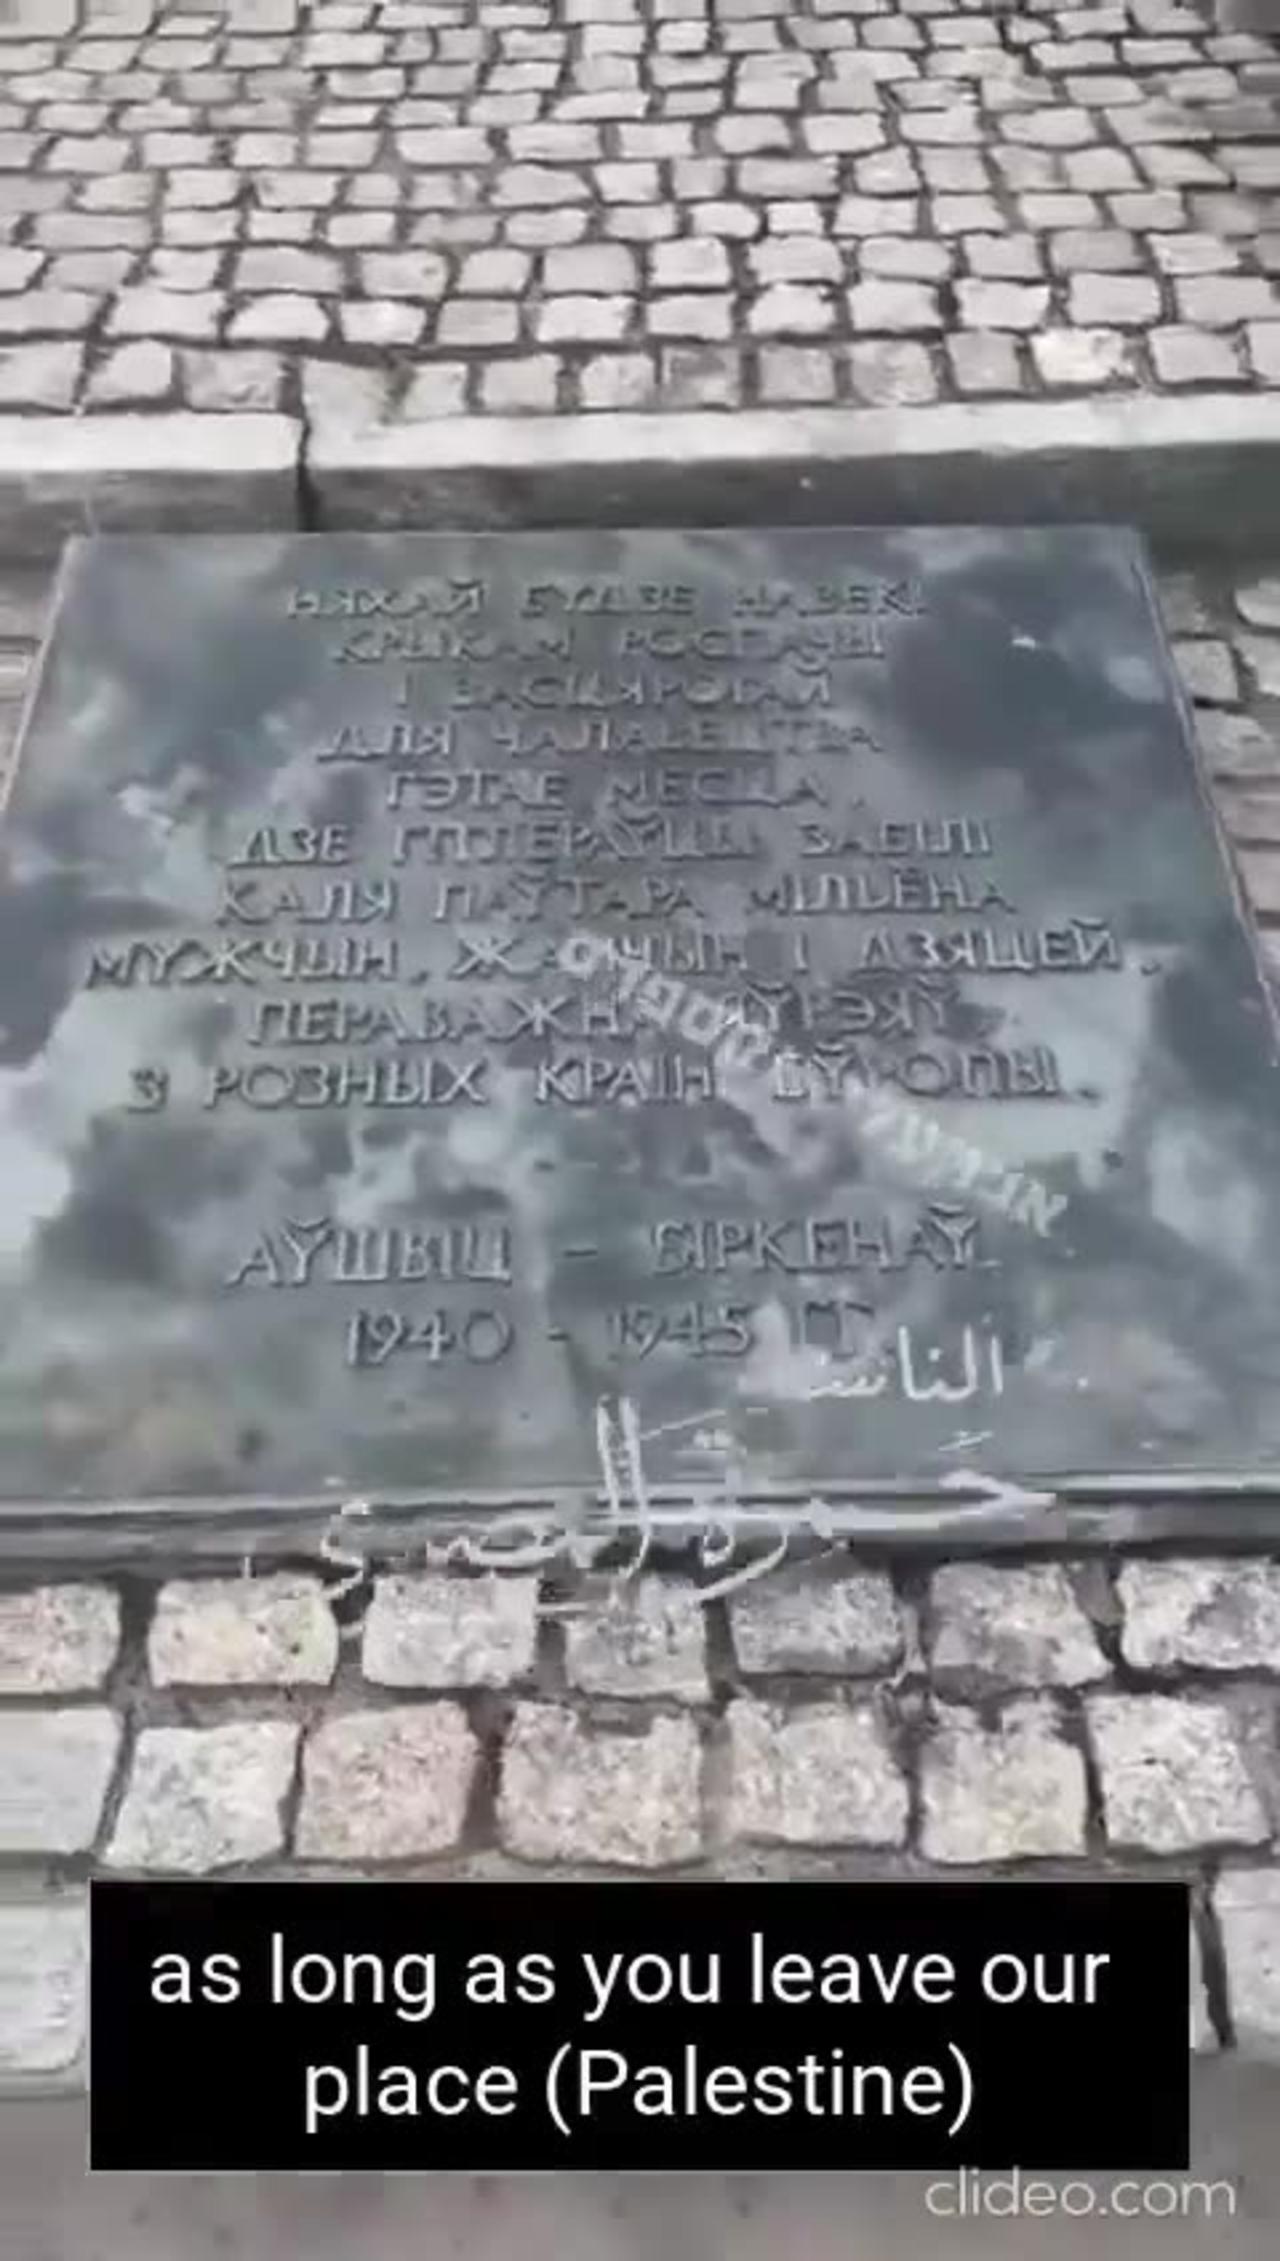 Palestinian man records a video from Auschwitz-Birkenau with a message for Israelis